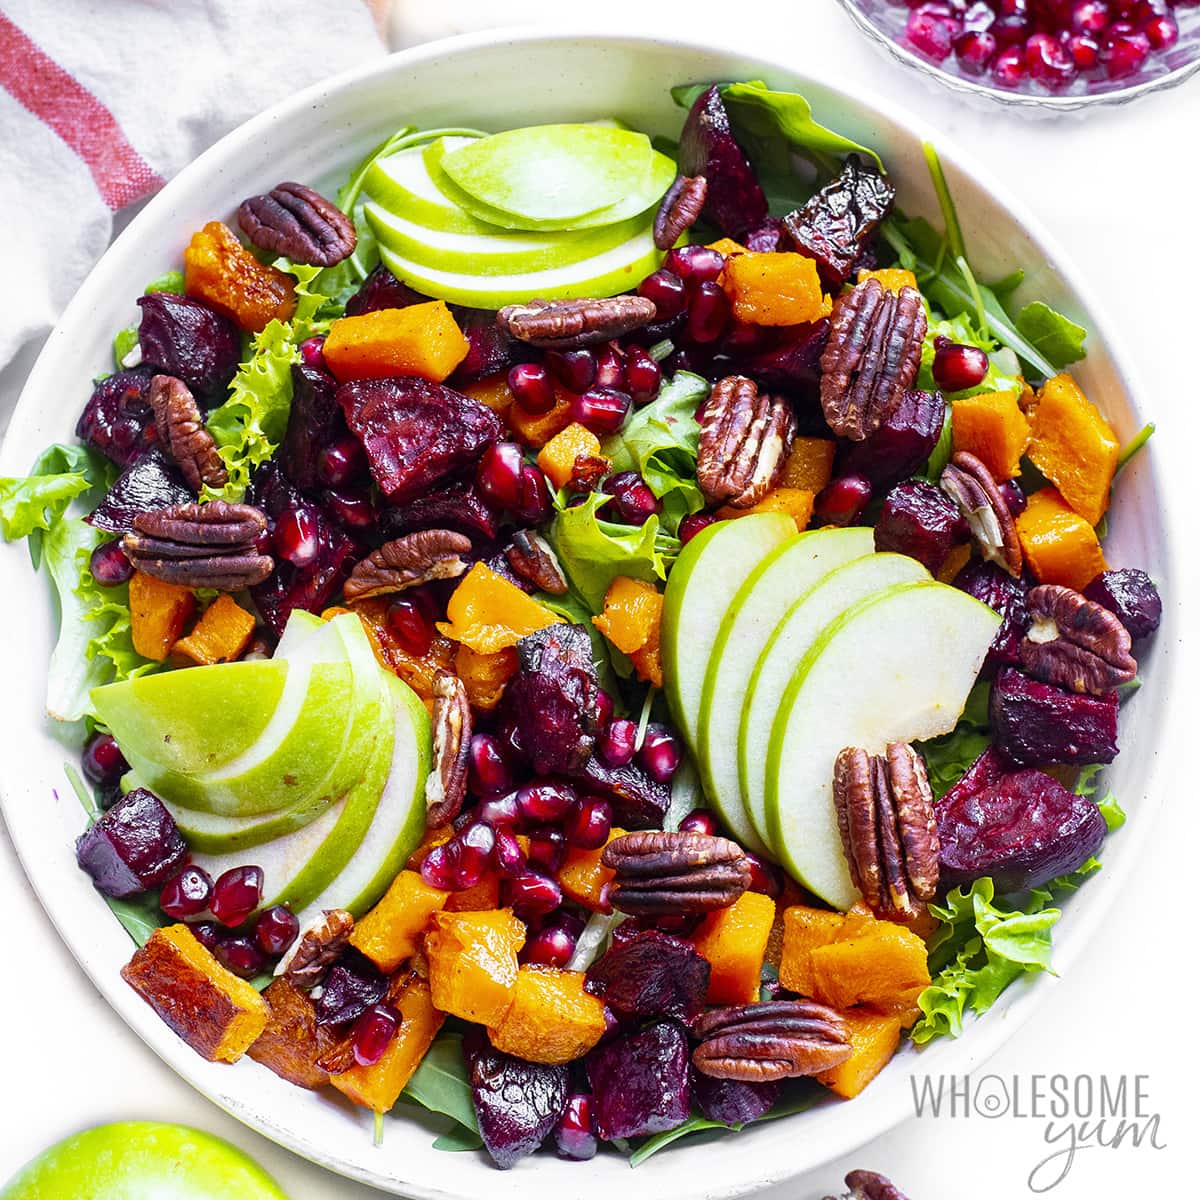 Greens, apples, butternut squash, beets, and pomegranate seeds in a bowl.